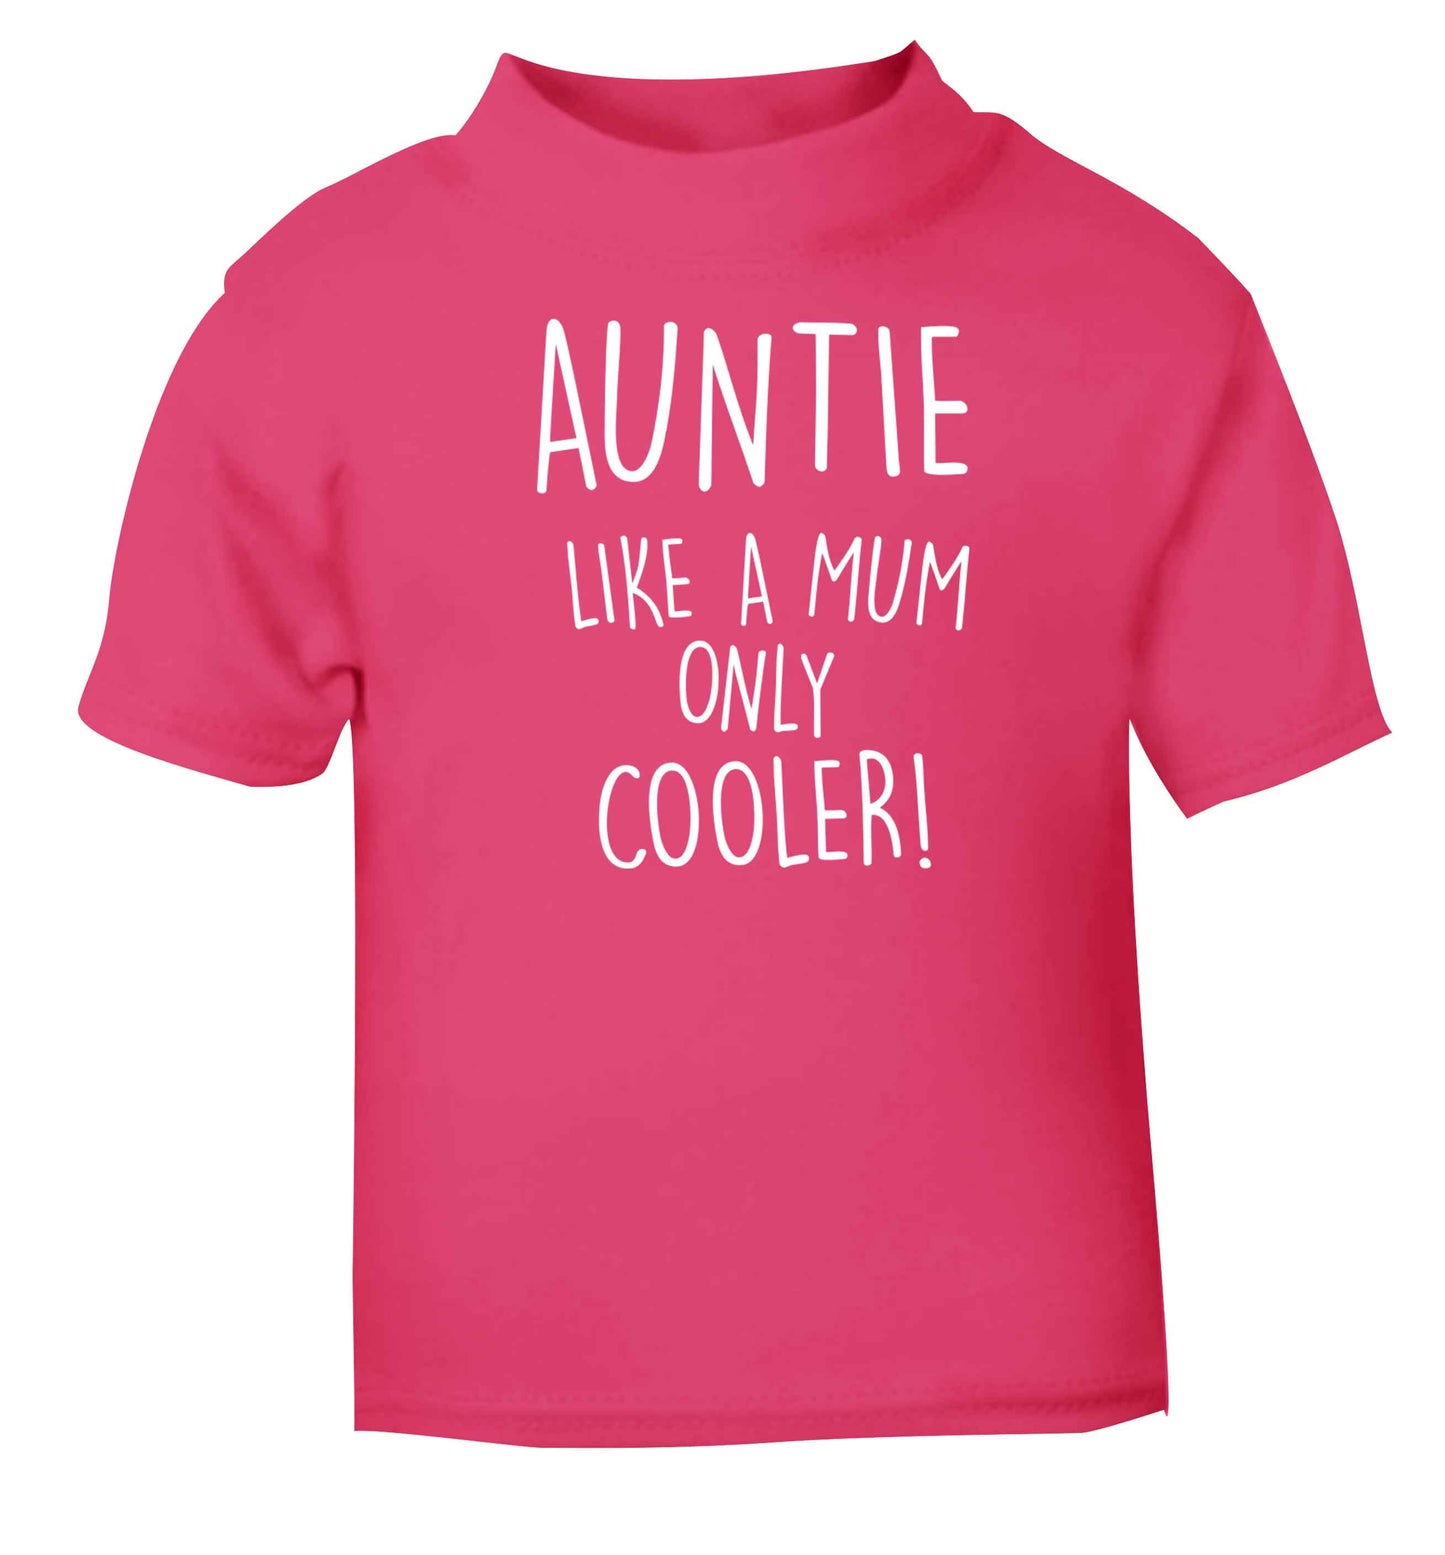 Auntie like a mum only cooler pink baby toddler Tshirt 2 Years